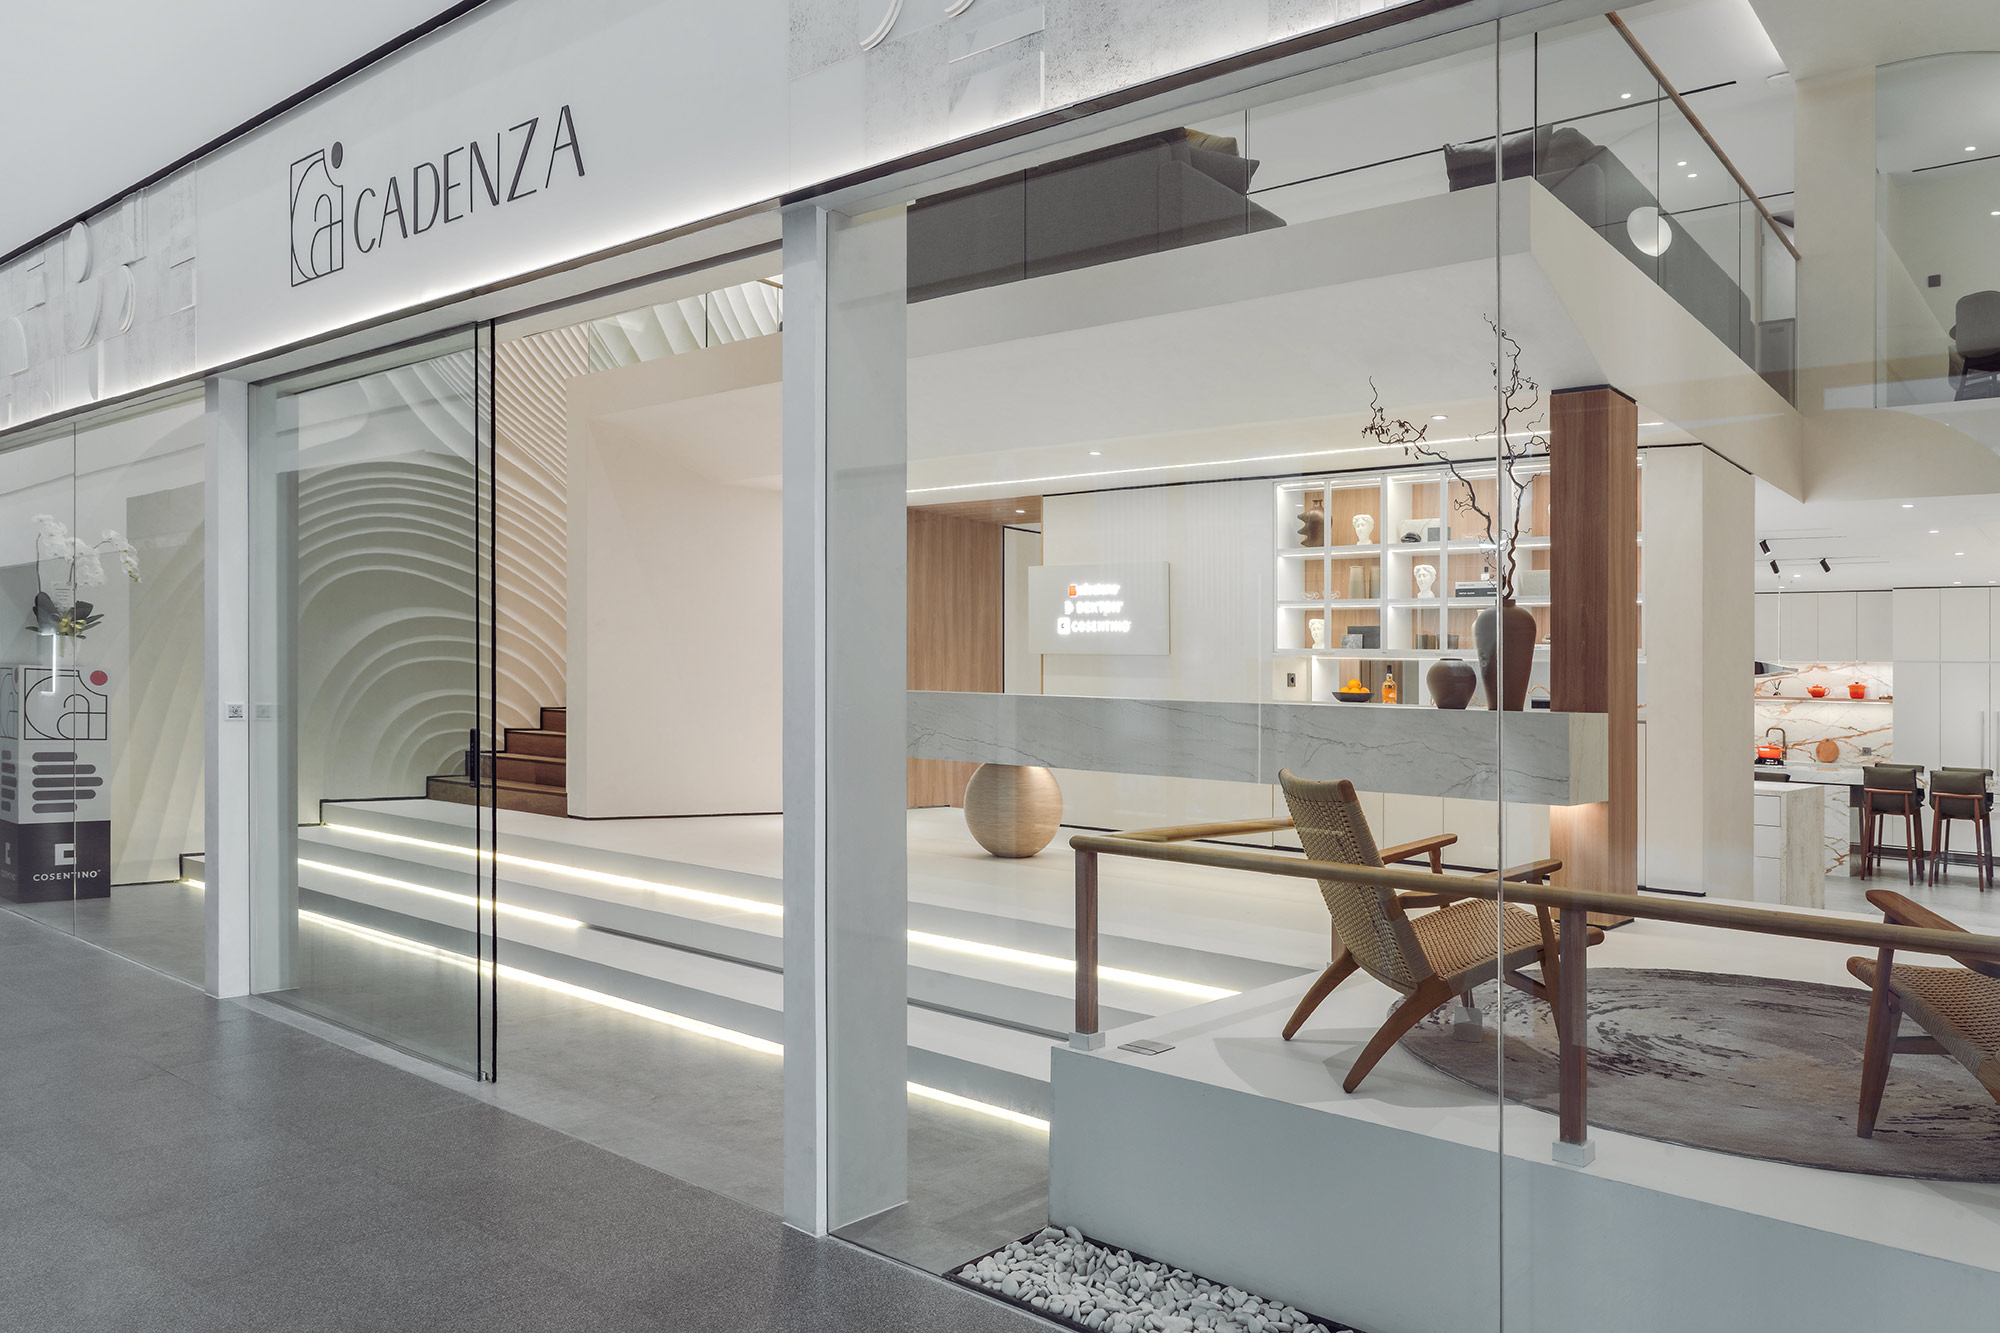 Image of Cadenza Showroom 6 in Cadenza Showroom, up to eight Dekton finishes to simulate the warmth of a home - Cosentino